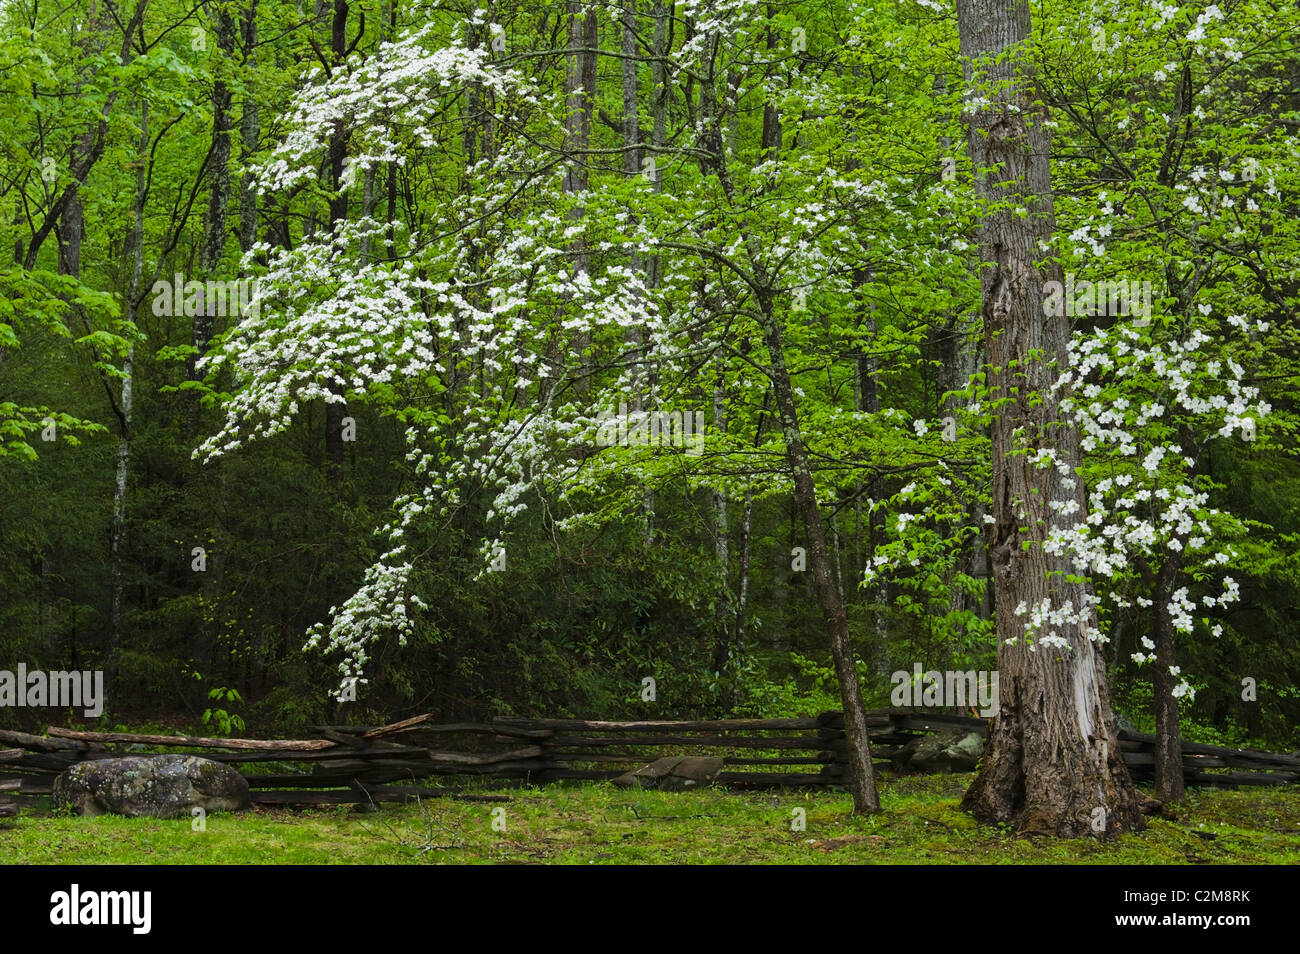 Flowering Dogwoods (Cornus Florida (L.) In The Forest With A Fence In The Great Smoky Mountains National Park; Tennessee, USA Stock Photo